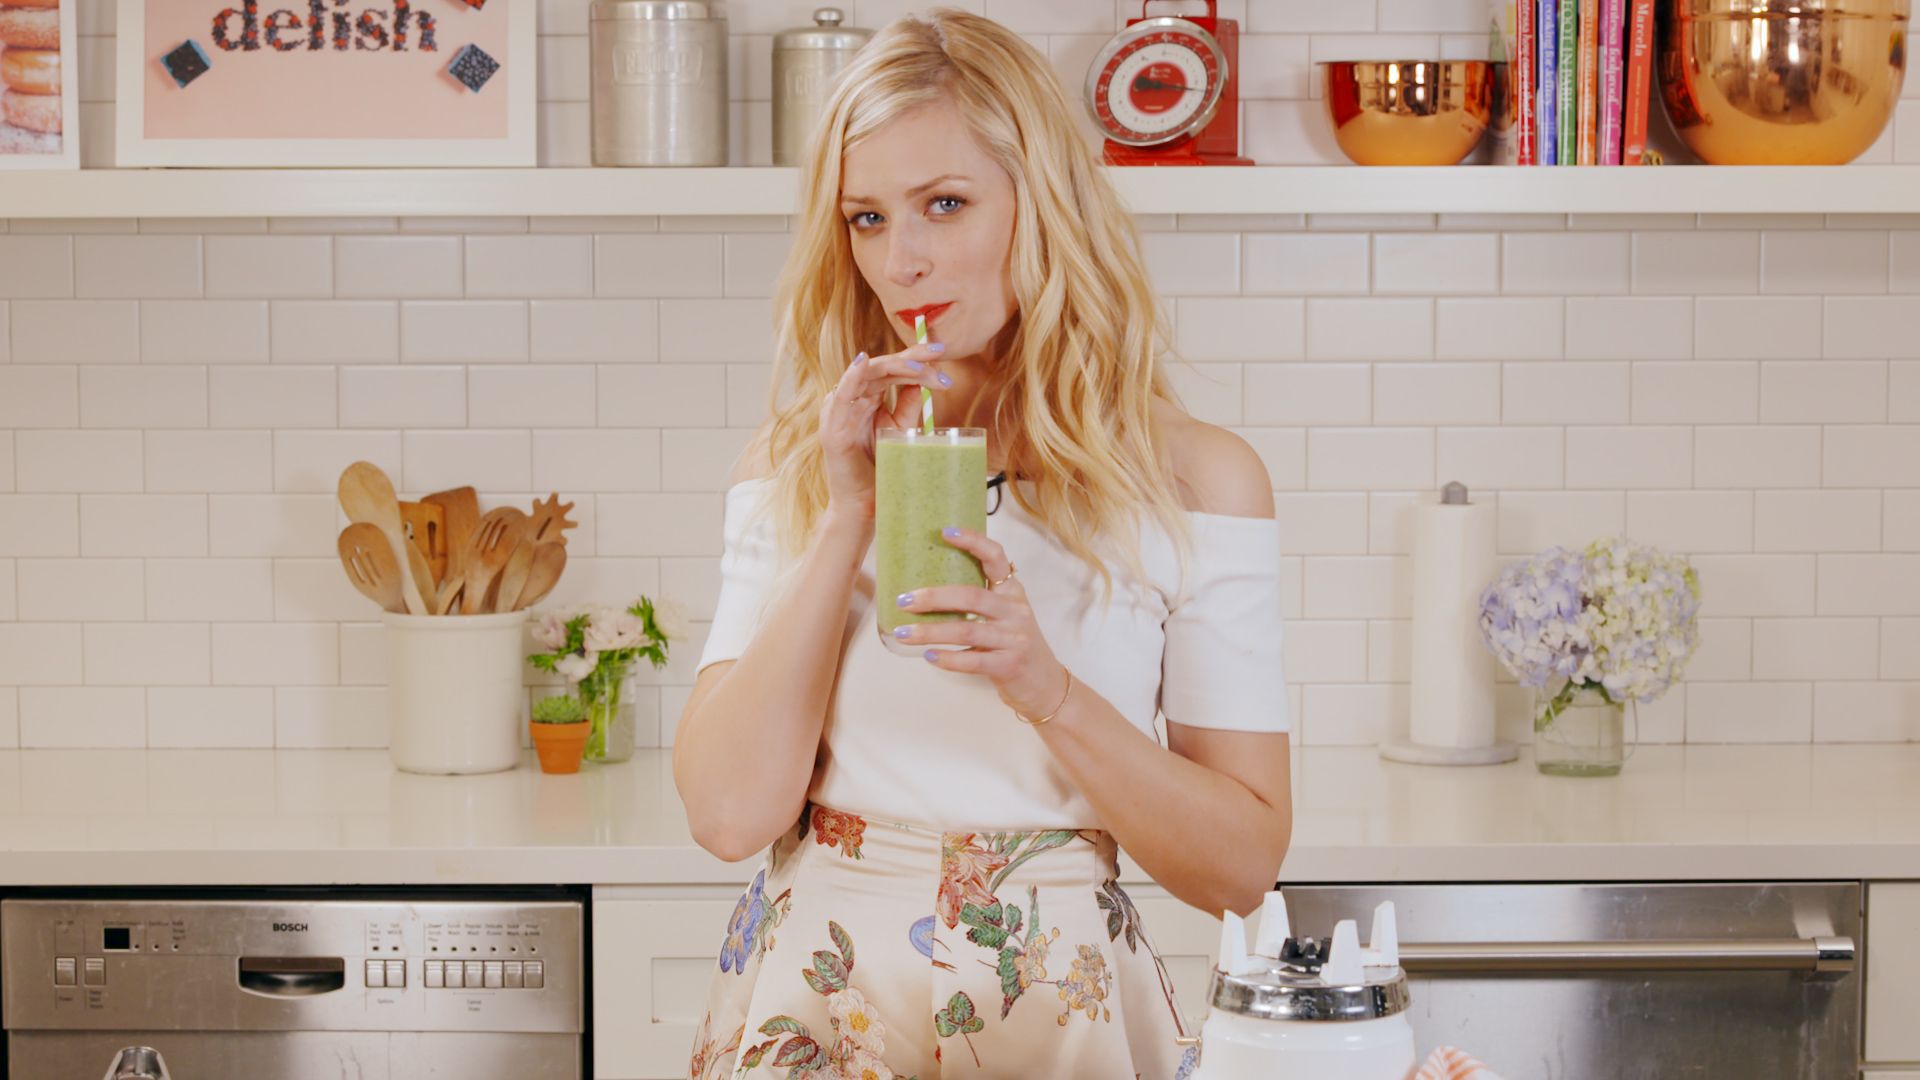 Beth Behrs Real Free Naked Pic And Videos - 3 Smoothies That Helped Transform Beth Behrs' Health - Beth Behrs Diet -  Delish.com